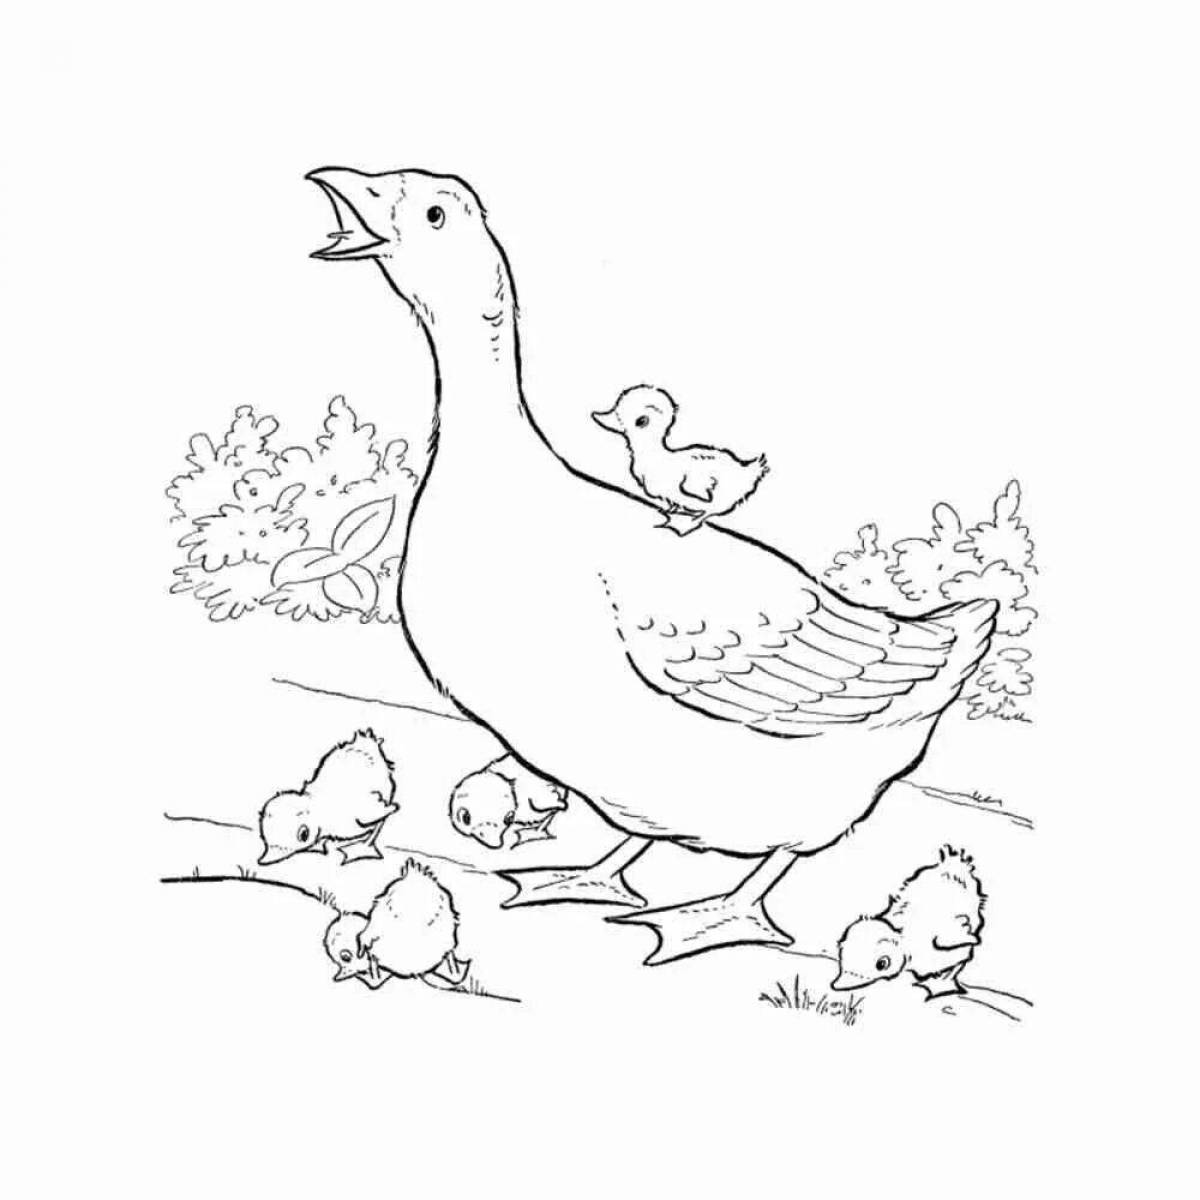 Stimulating bird coloring page for 6-7 year olds